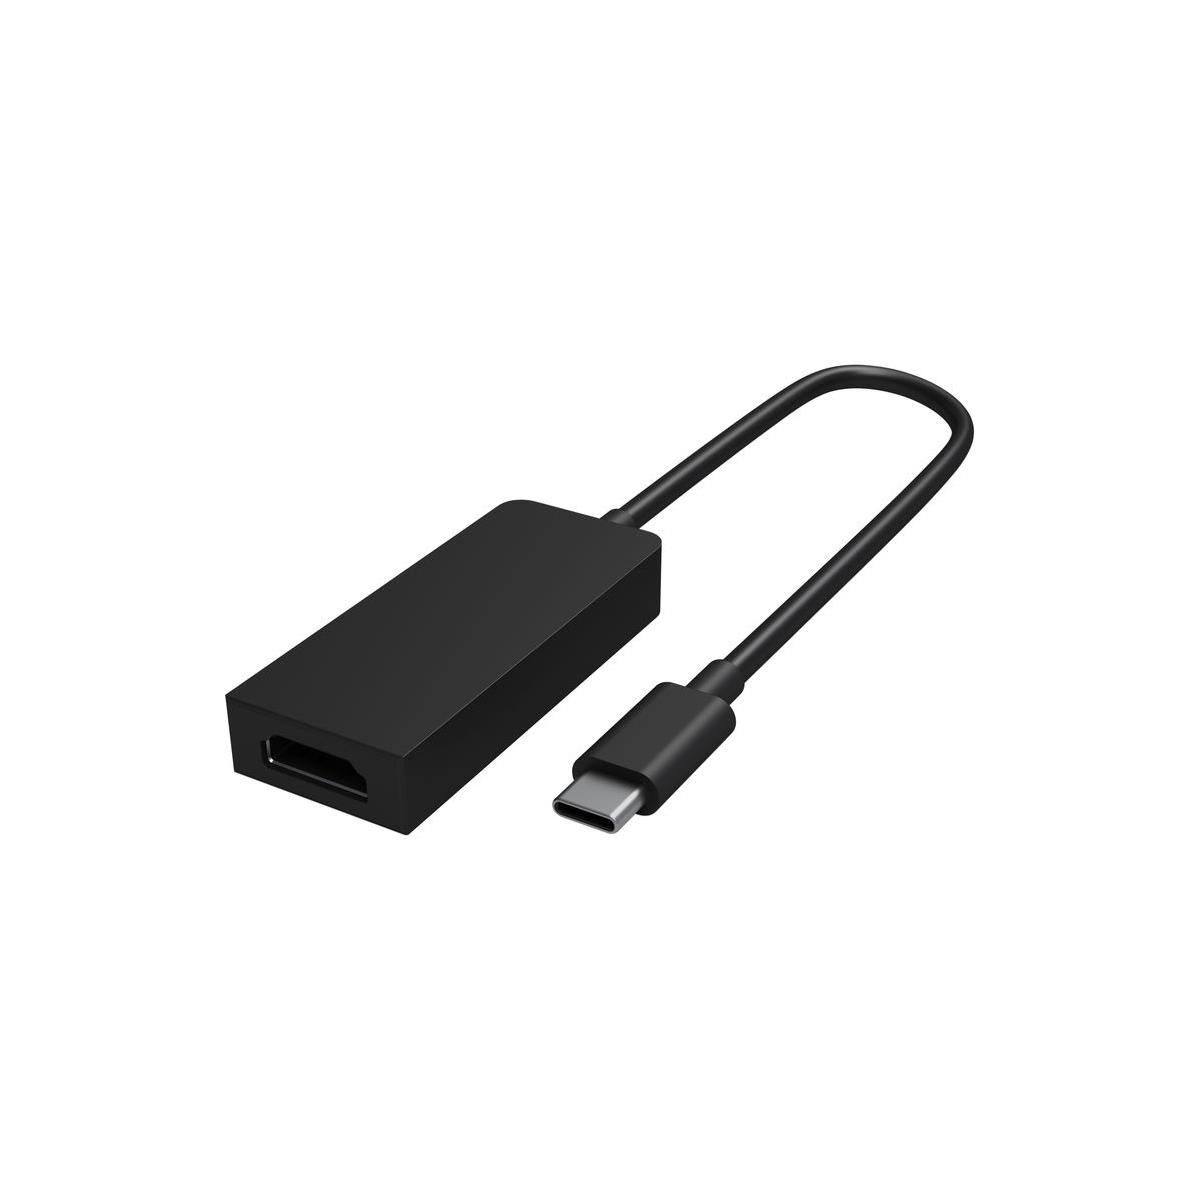 Image of Microsoft USB-C to HDMI Adapter Cable for Surface Book 2